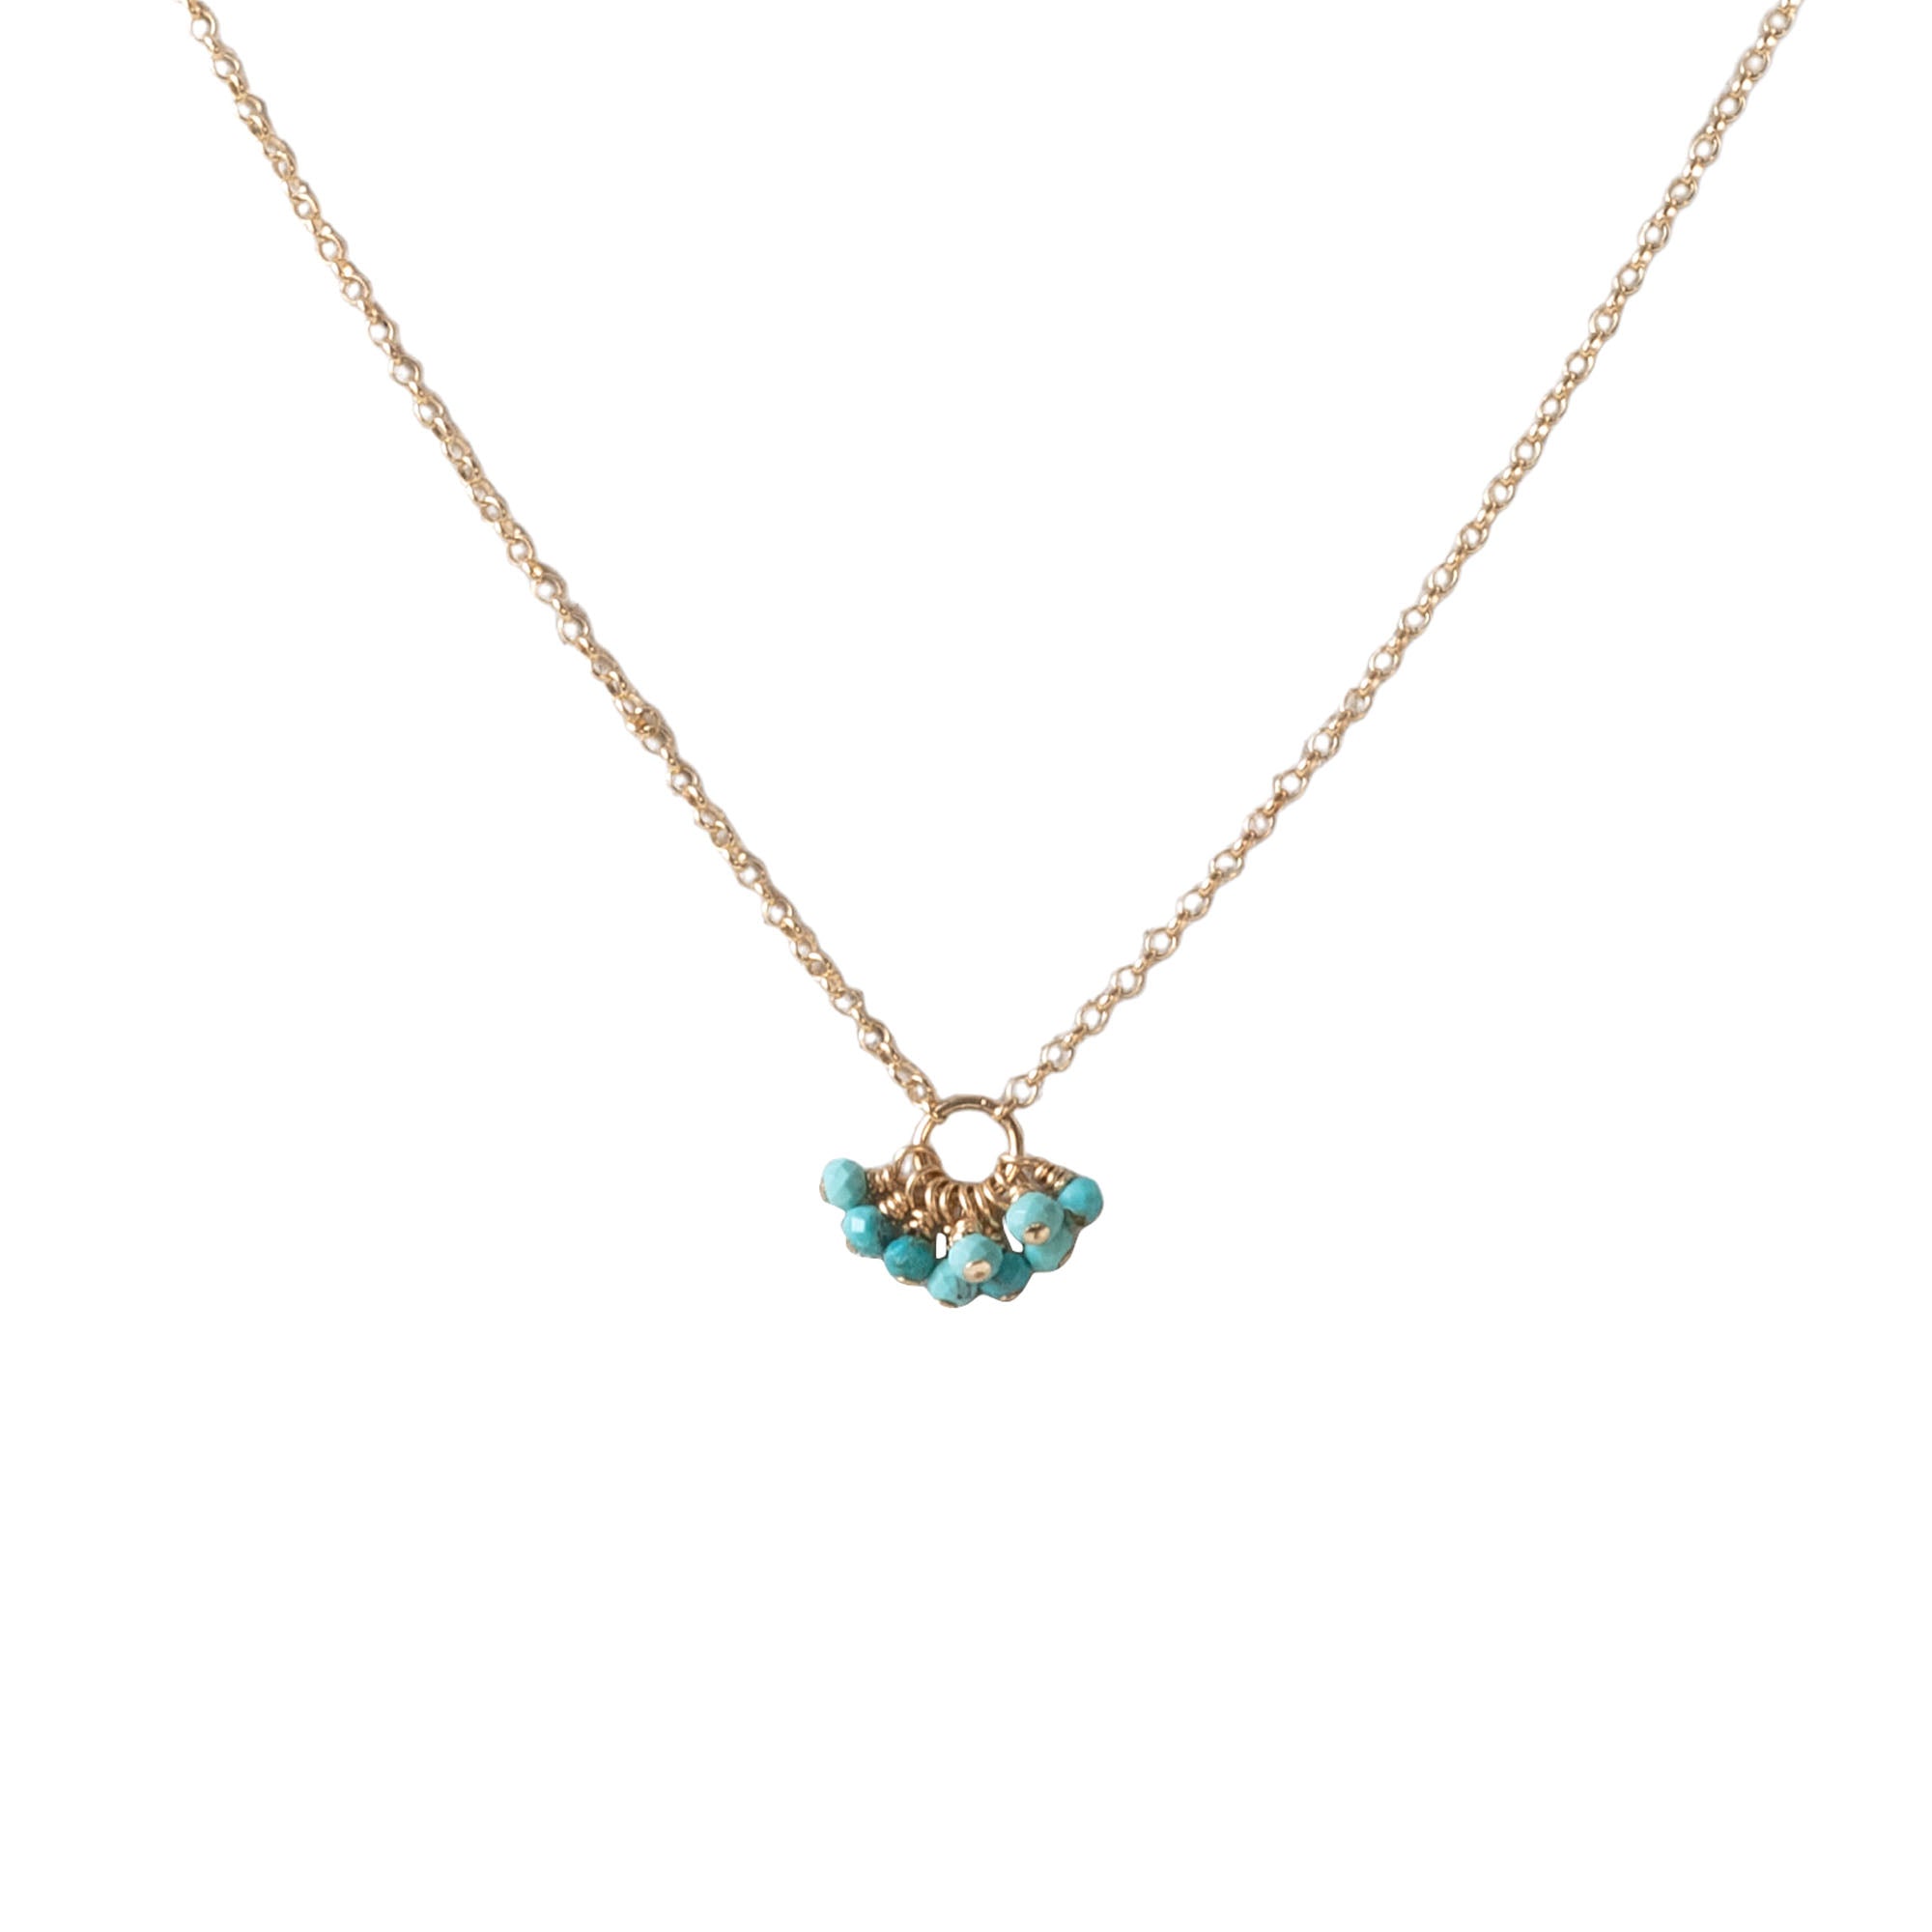 Tiny Turquoise Gemstone Cluster Necklace 14k Gold Fill - Favor Jewelry